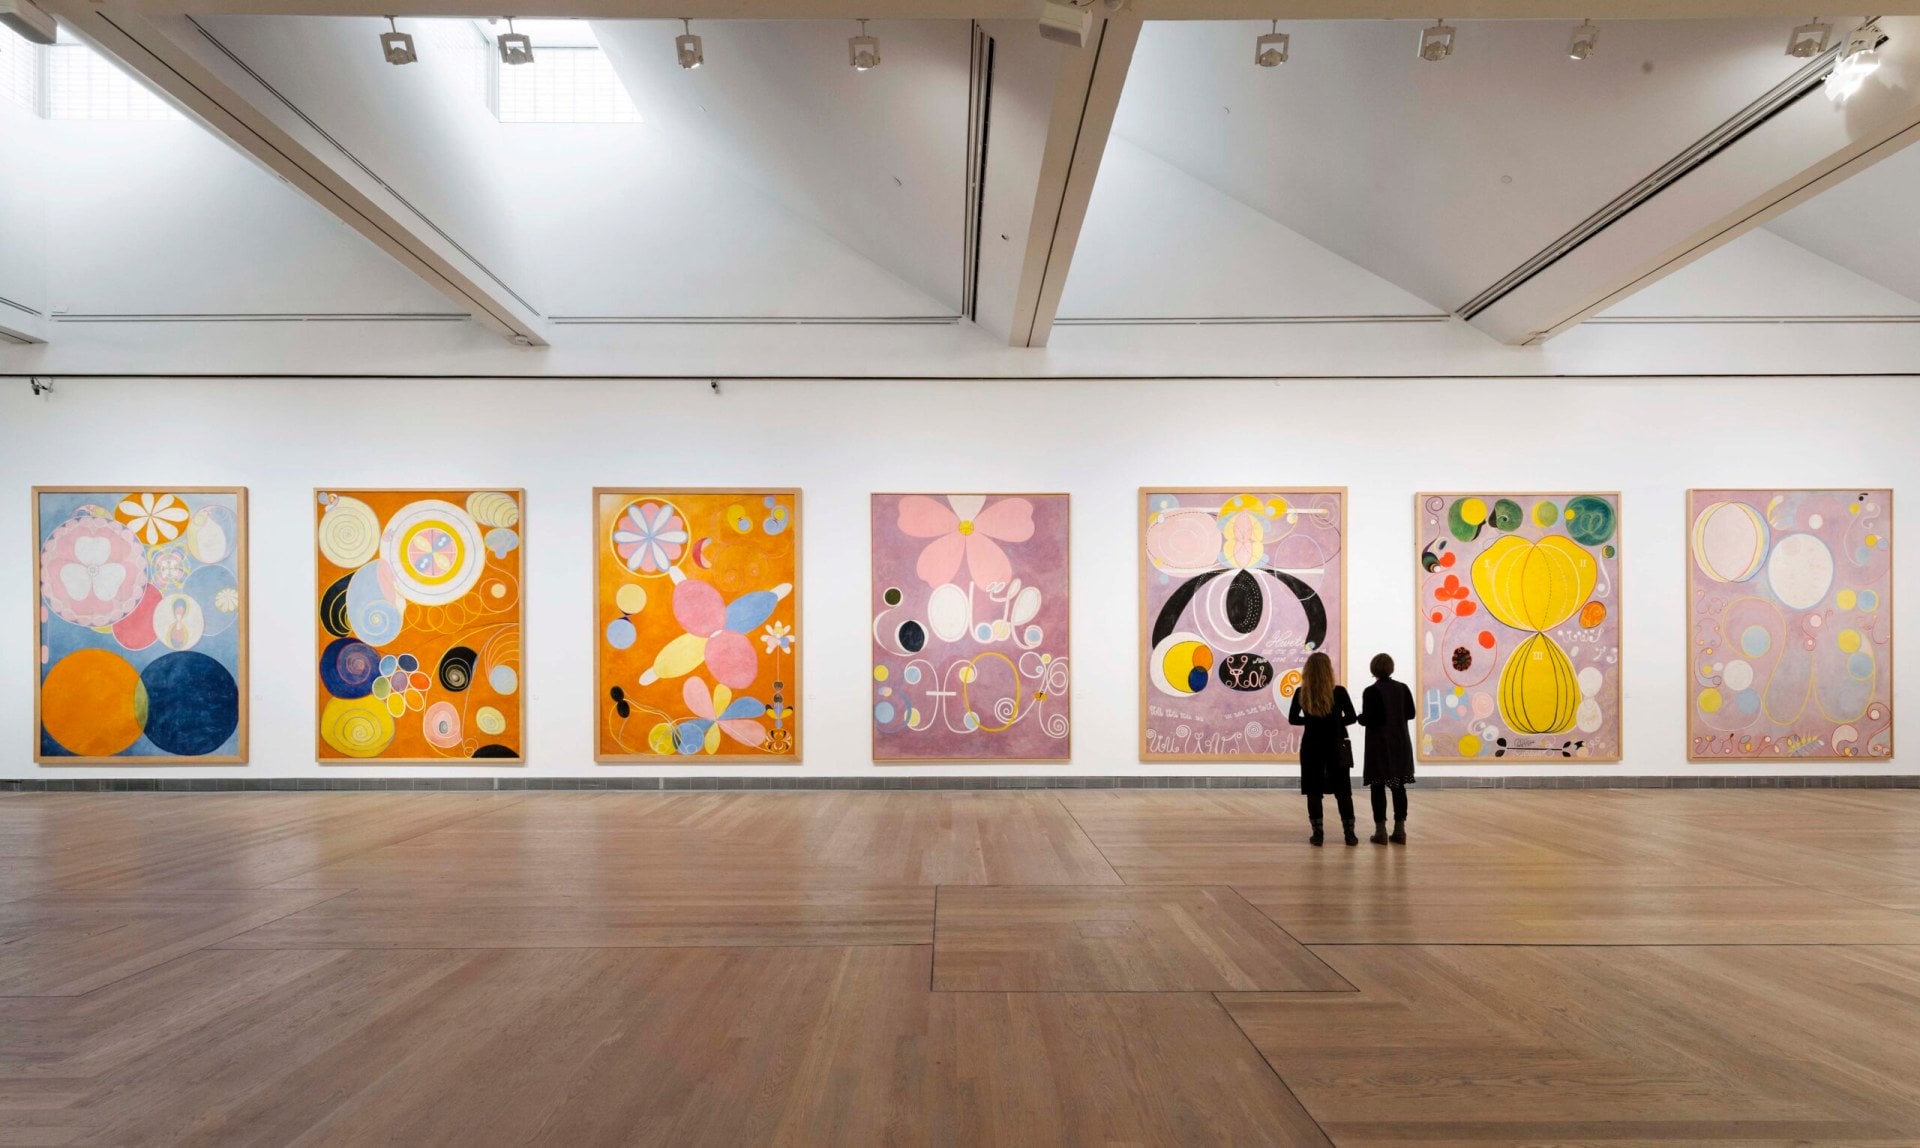 Hilma af Klint's The Ten Largest as part of Painting for the Temple